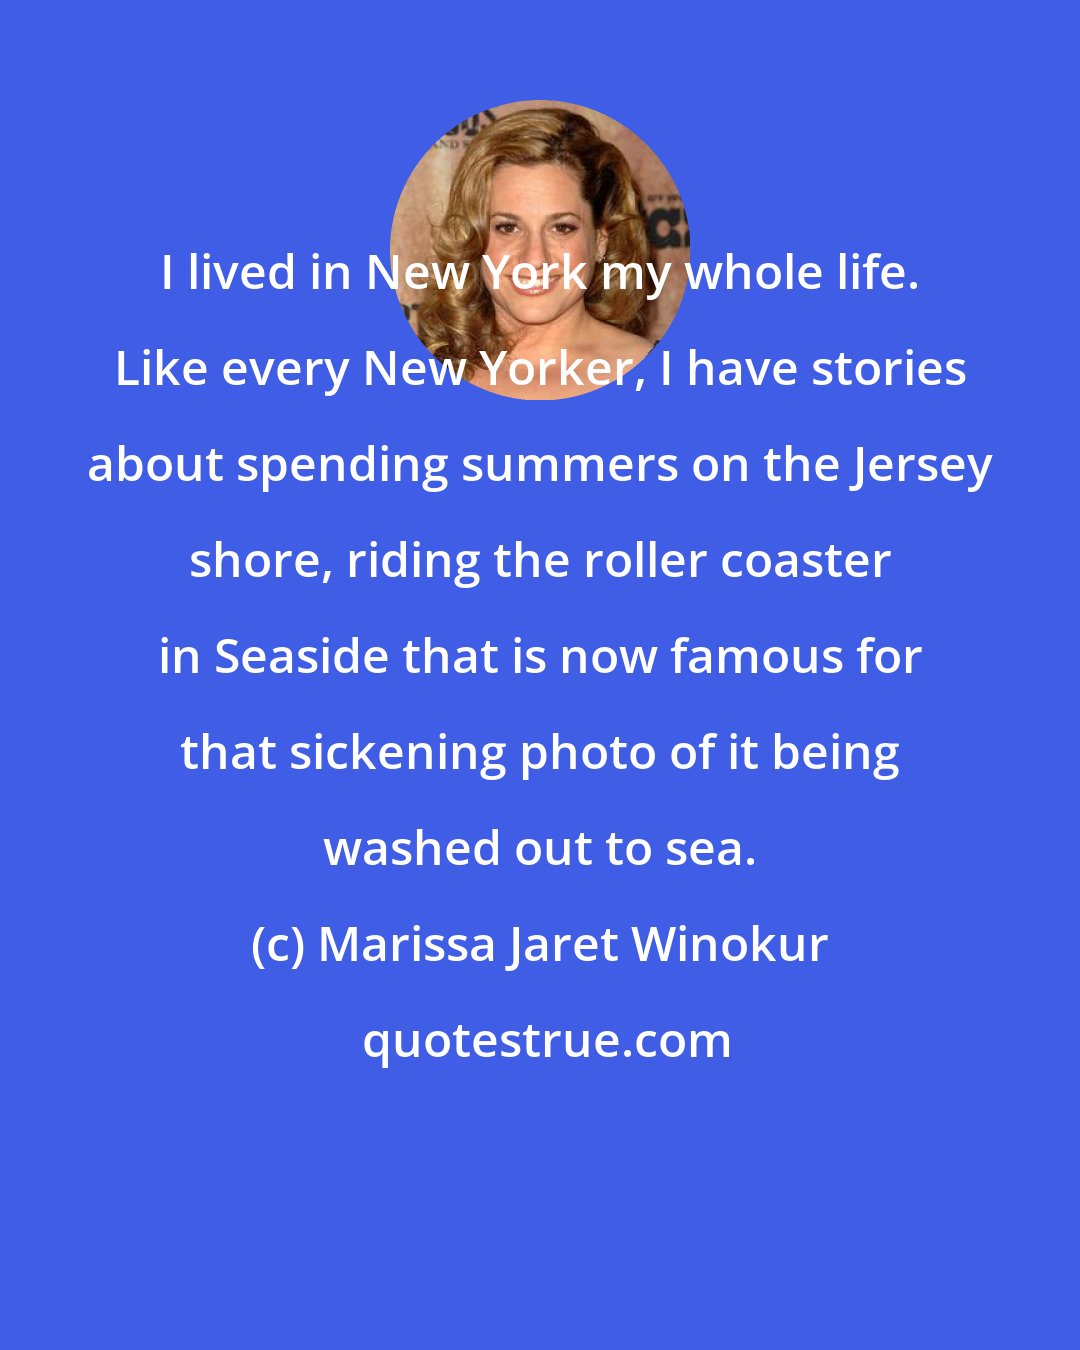 Marissa Jaret Winokur: I lived in New York my whole life. Like every New Yorker, I have stories about spending summers on the Jersey shore, riding the roller coaster in Seaside that is now famous for that sickening photo of it being washed out to sea.